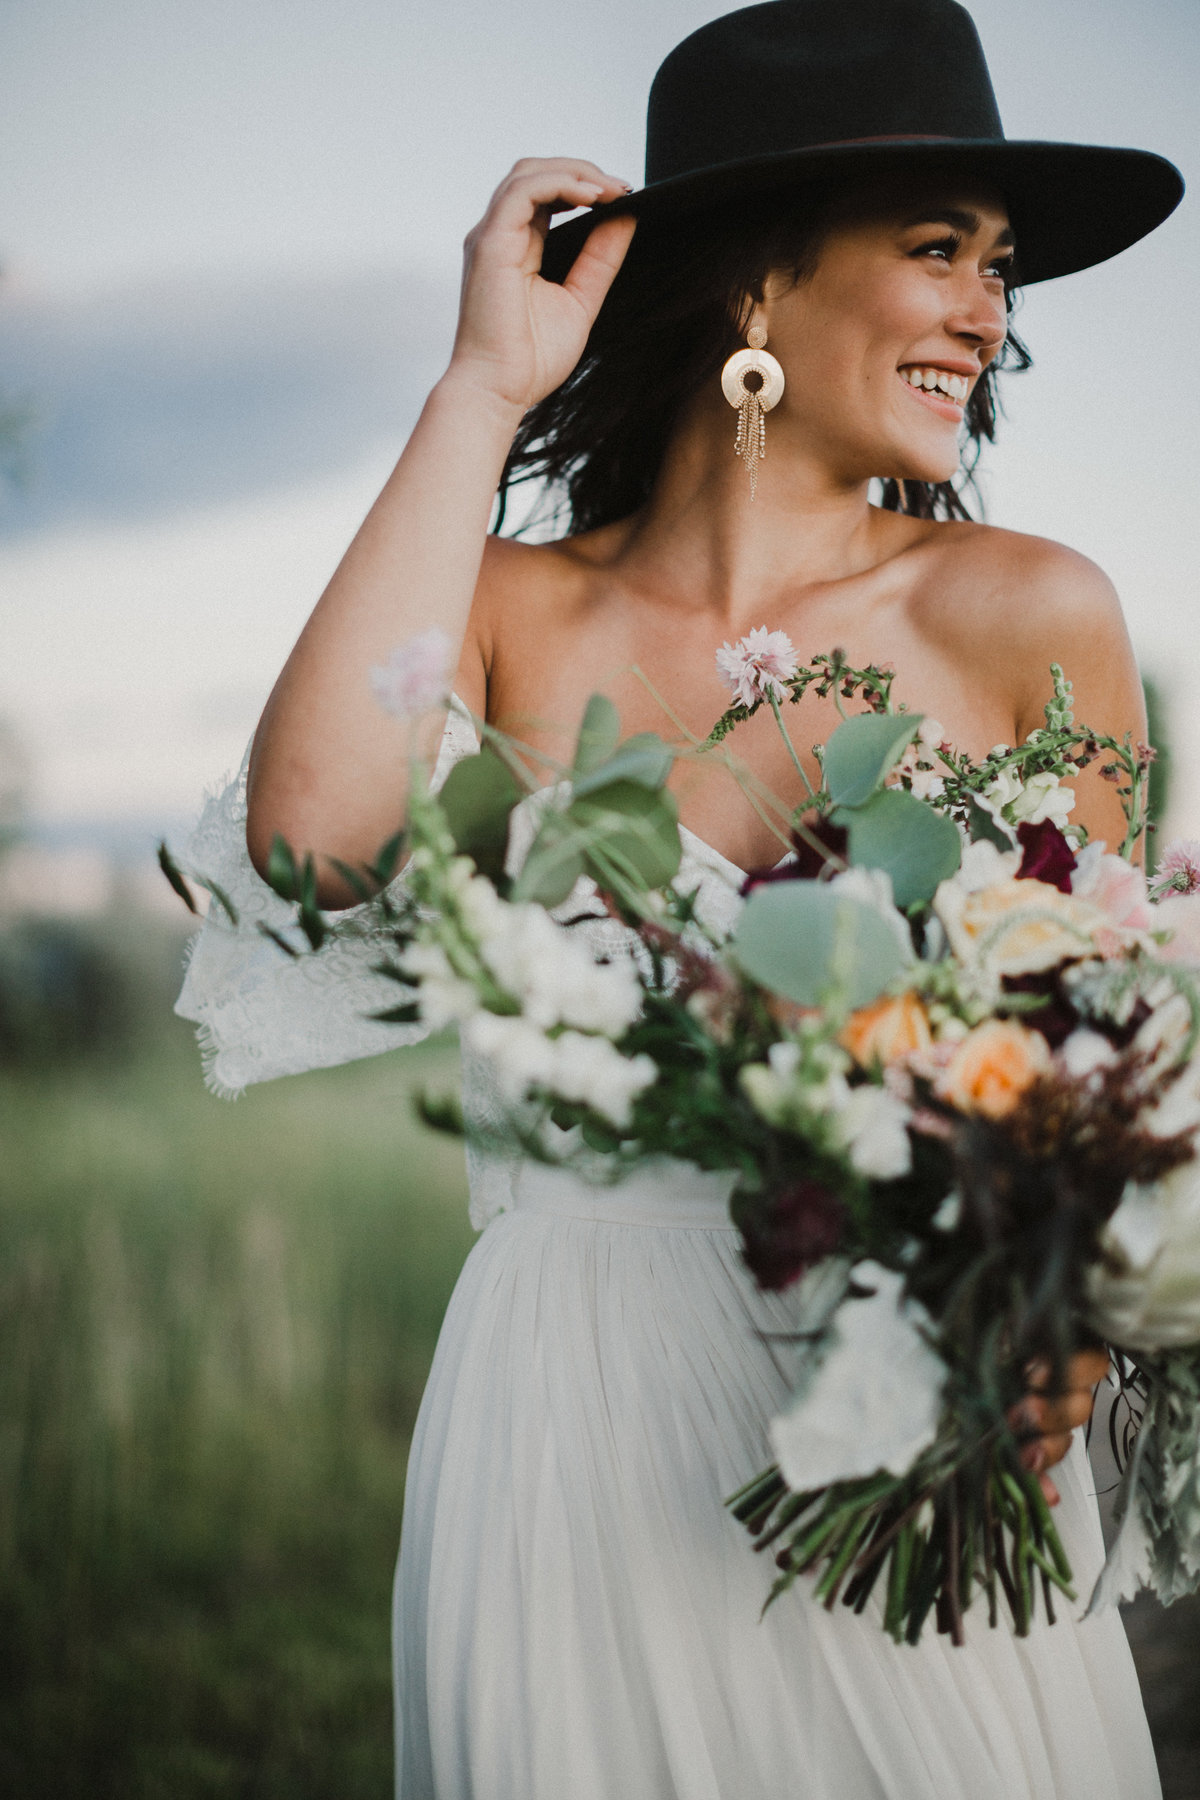 Soul and Stem Floral wedding bouquet for a boho inspired styled shoot in Missoula, Montana.